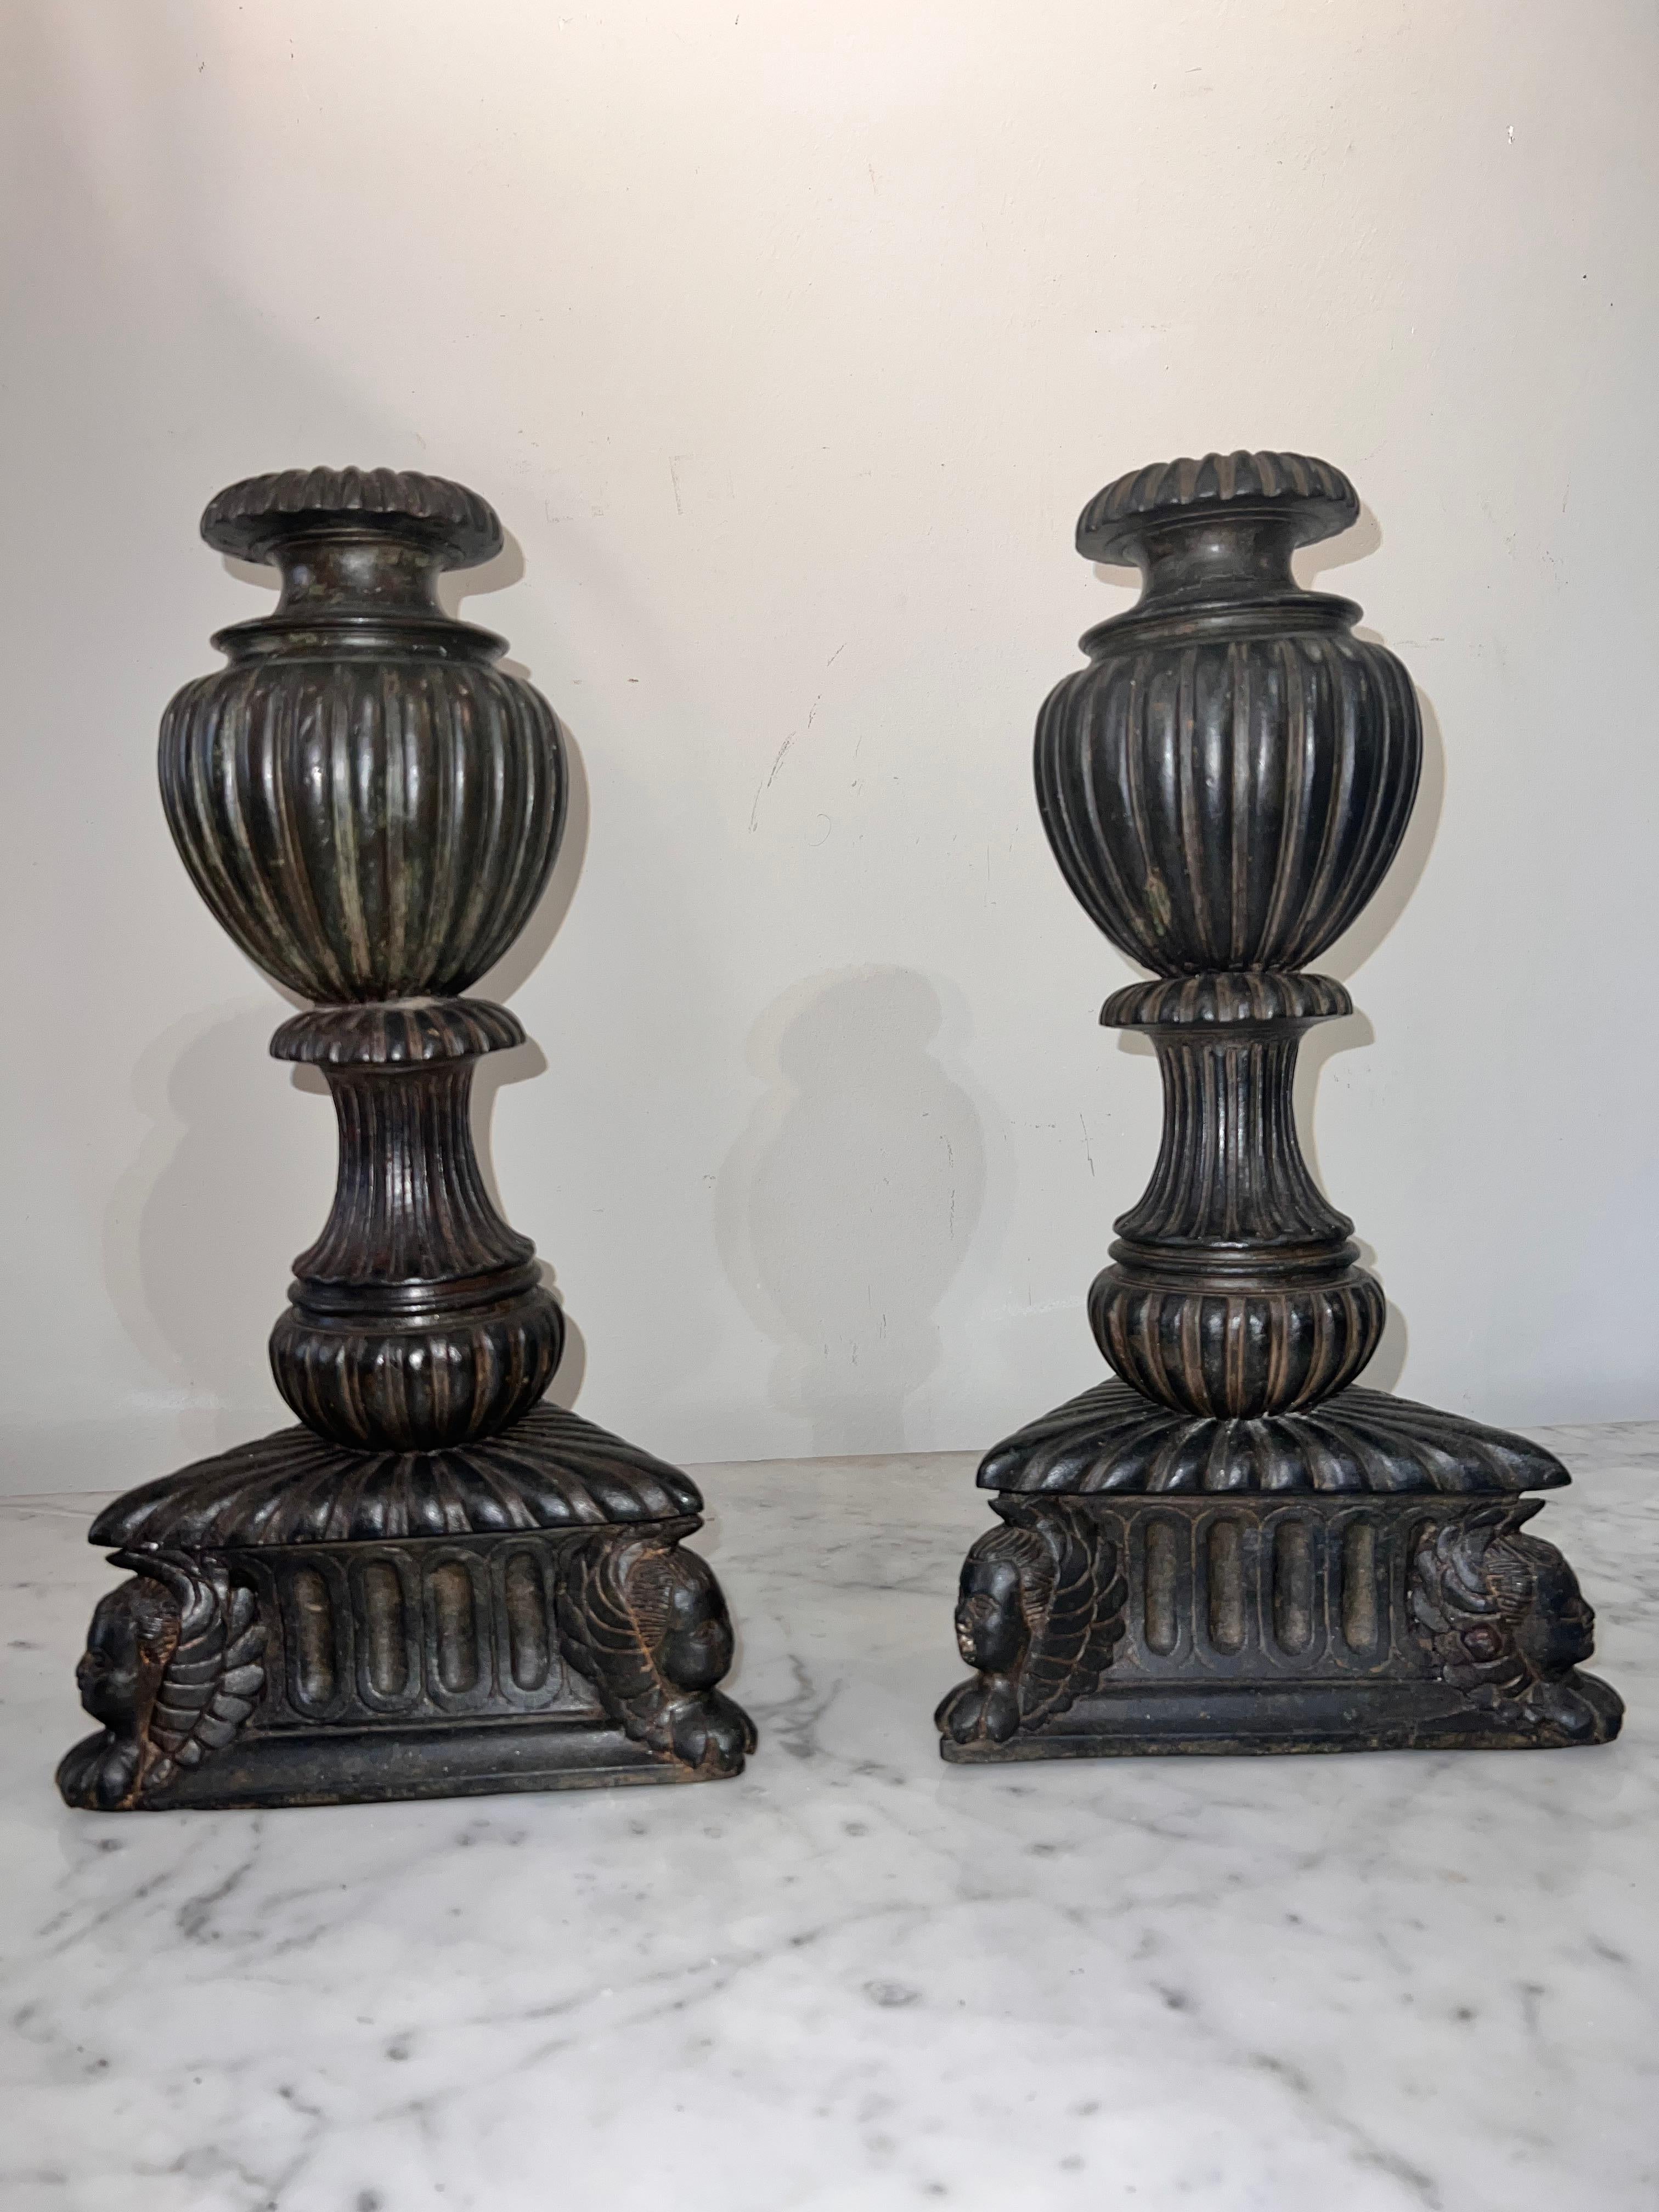 Beautiful pair of bases for church candlesticks in burnished bronze, baluster-shaped with pods, triangular base with Cherub head details. Bases weighted with stucco.
Florentine manufacture of the 16th century.